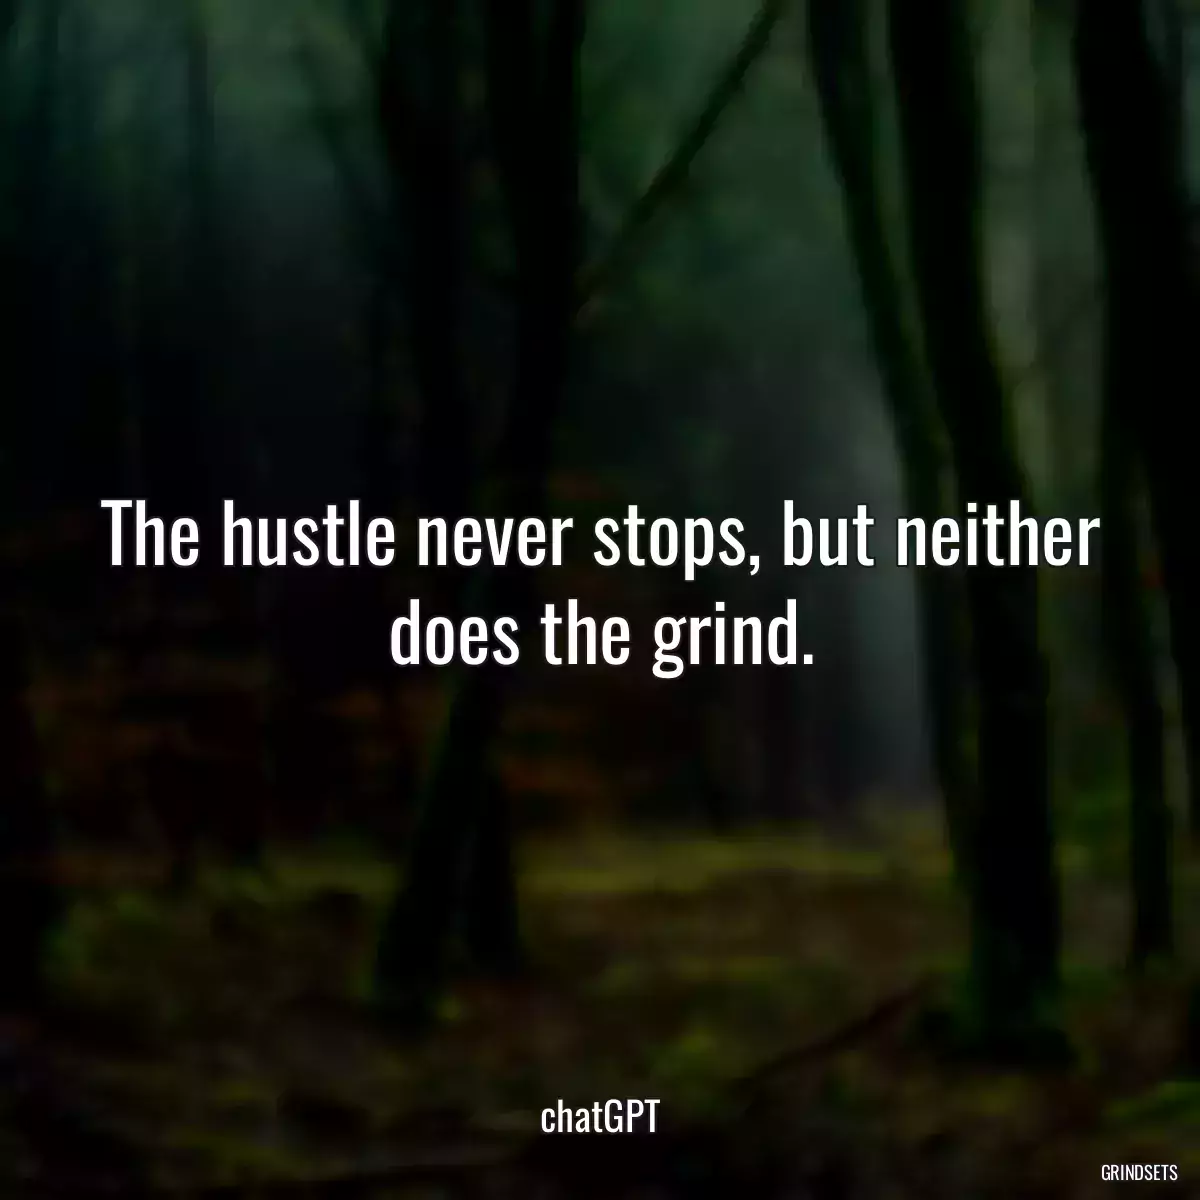 The hustle never stops, but neither does the grind.